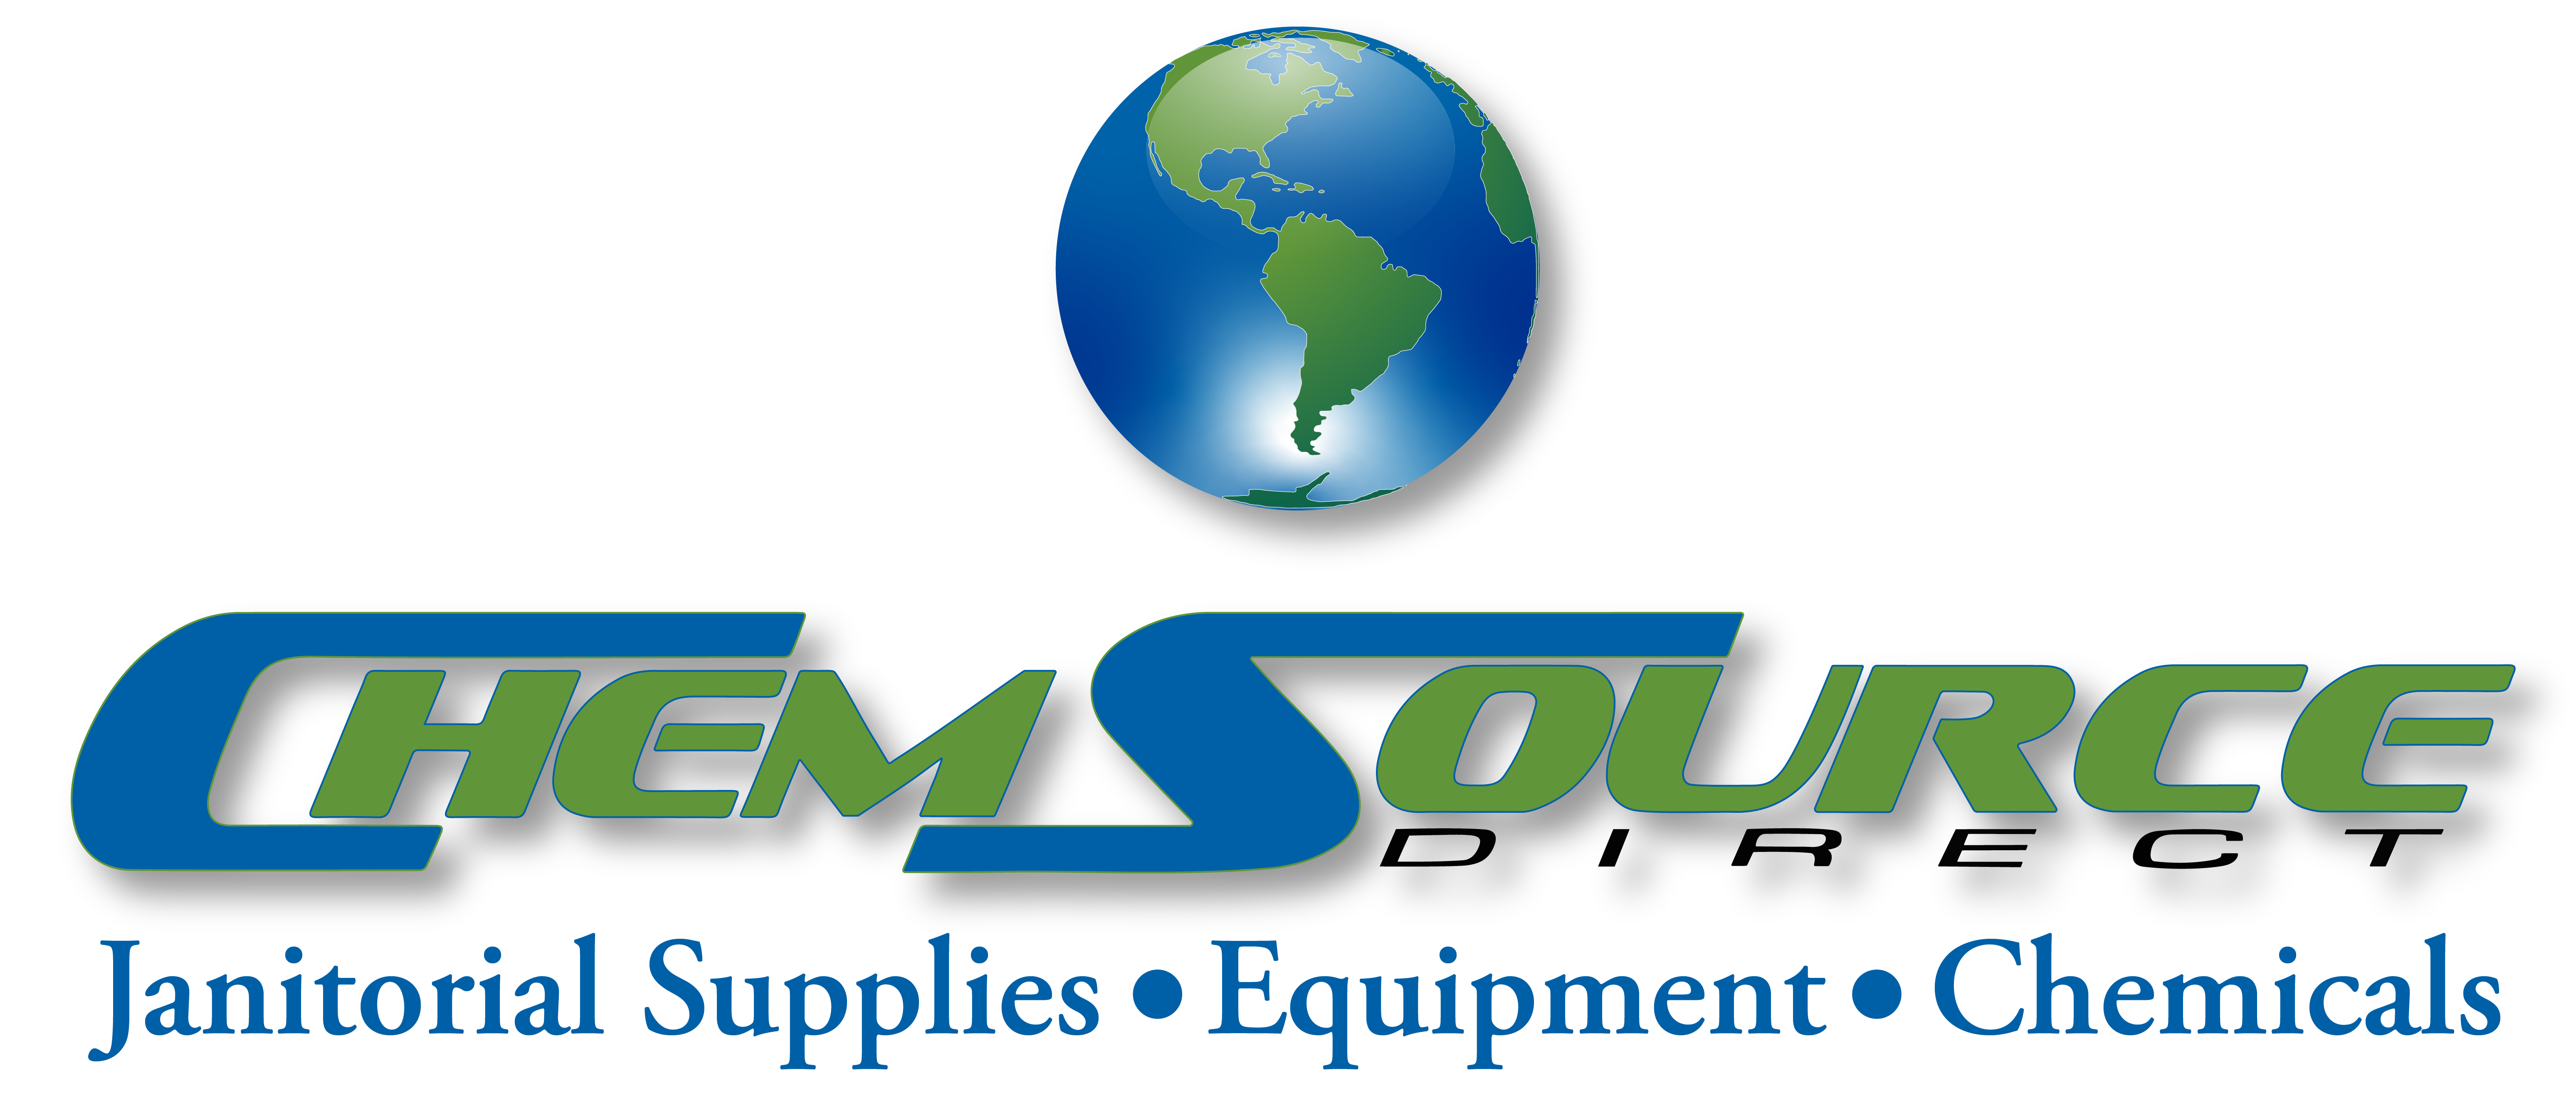 Chemsource - janitorial supplies & equipment chemicals.